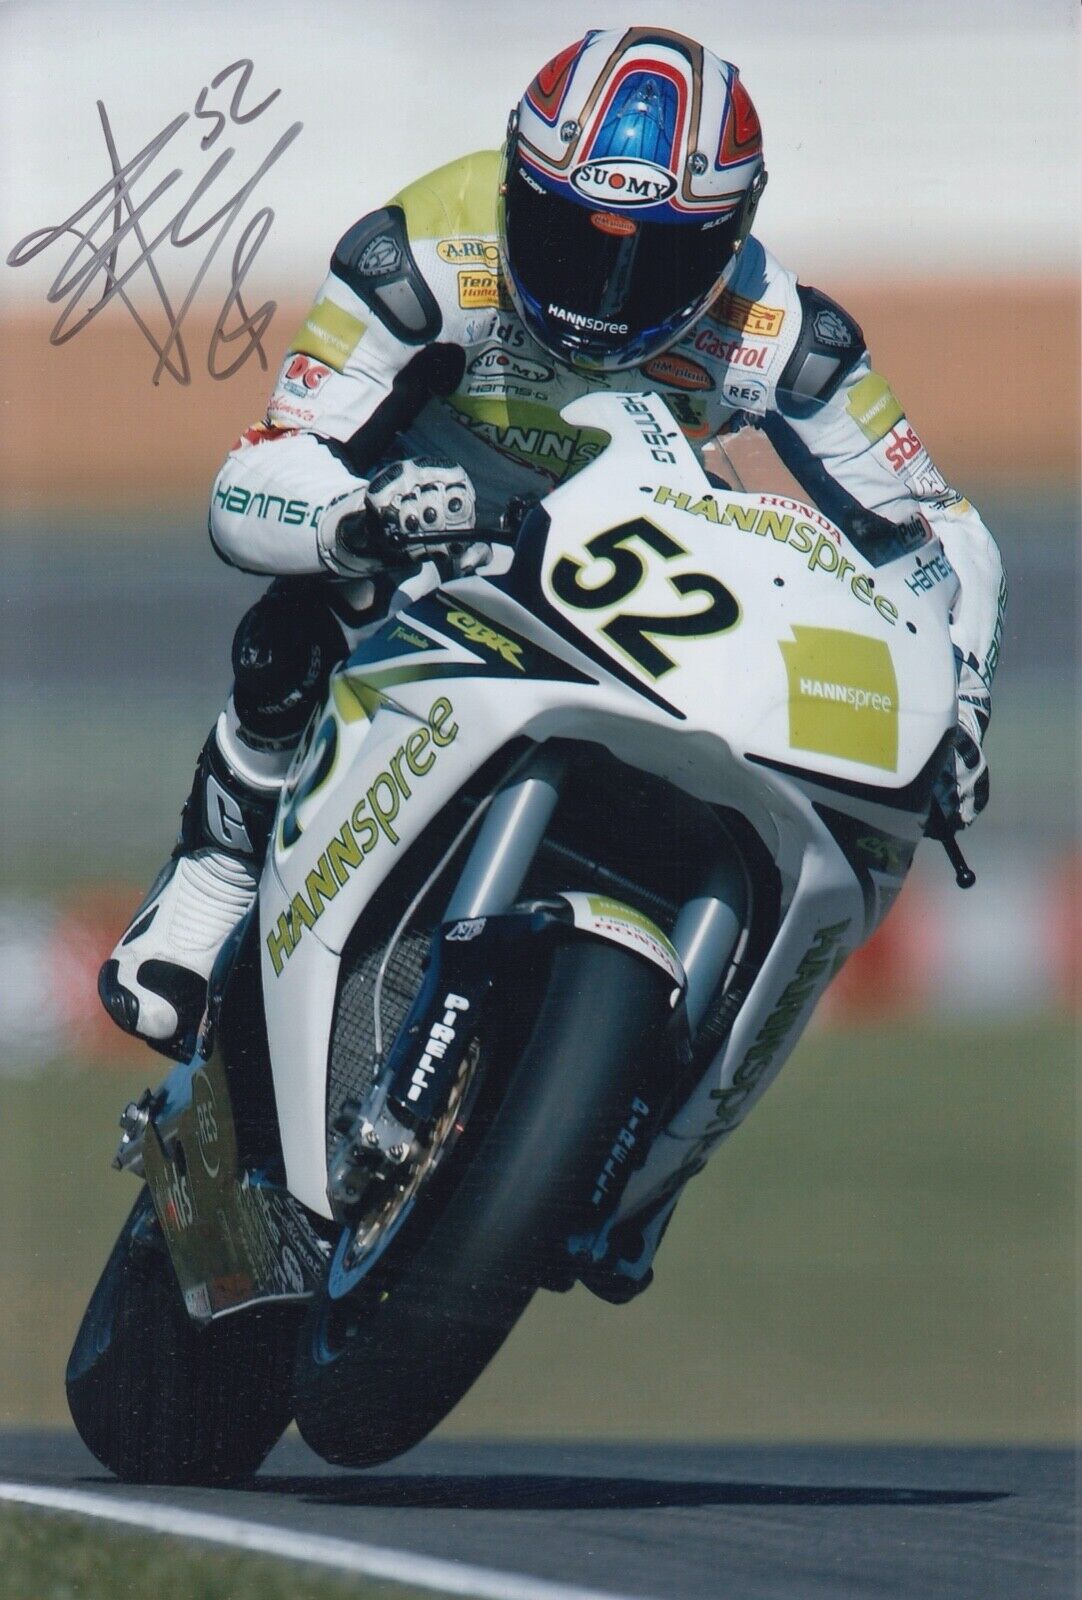 JAMES TOSELAND HAND SIGNED 12X8 Photo Poster painting WSBK AUTOGRAPH SUPERBIKES 7